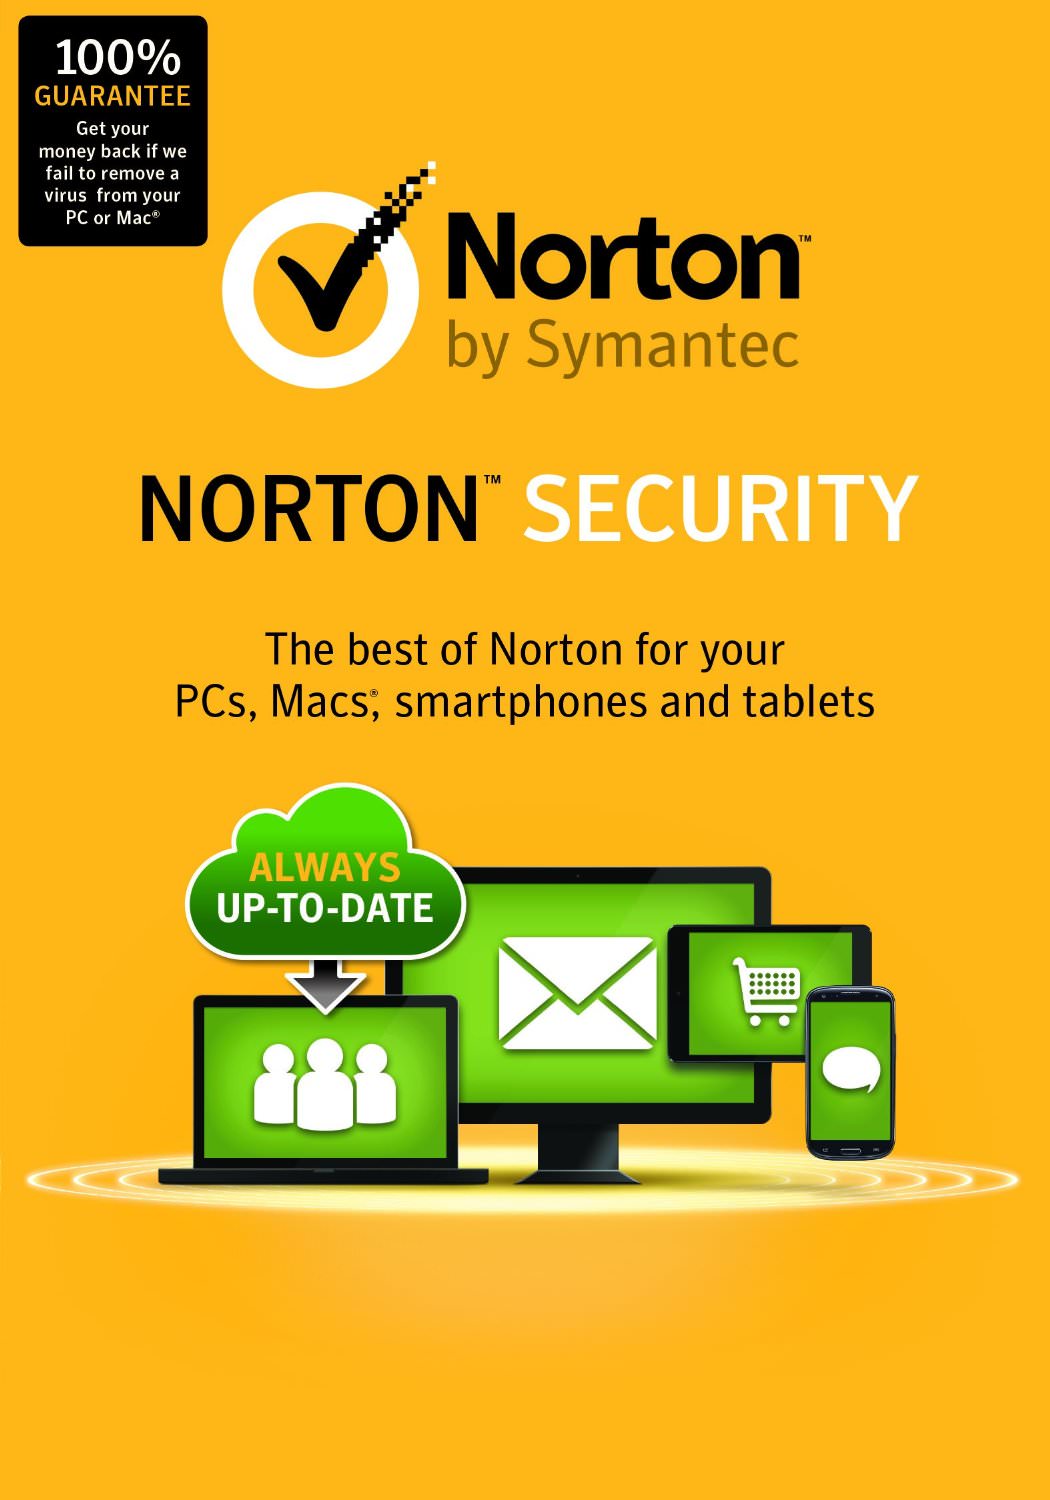 How To Install Norton Antivirus In Laptop Without Cd Drive